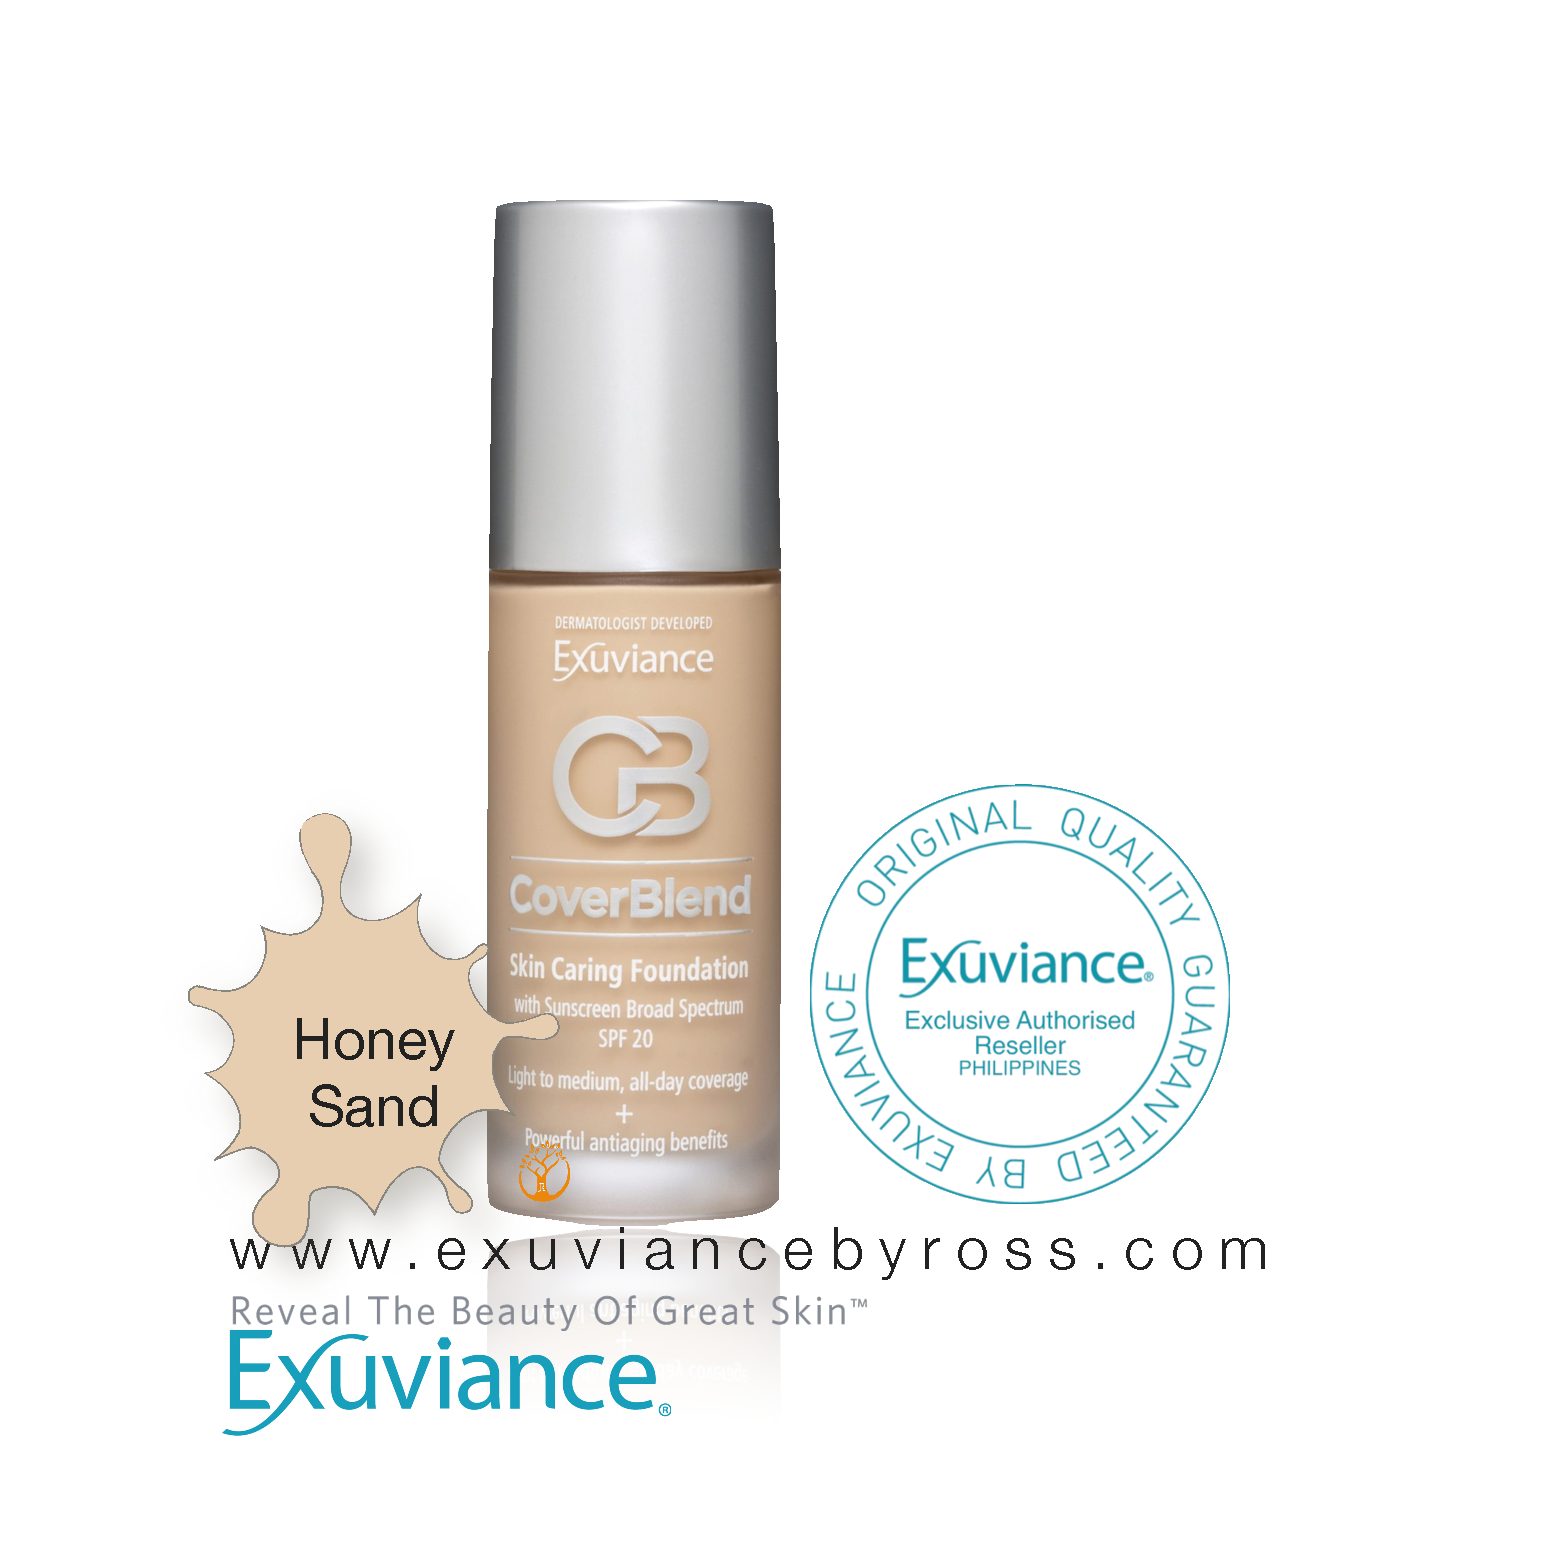 Exuviance CoverBlend Skin Caring Foundation SPF 20 30mL – Honey Sand -  APRICUS WELLNESS